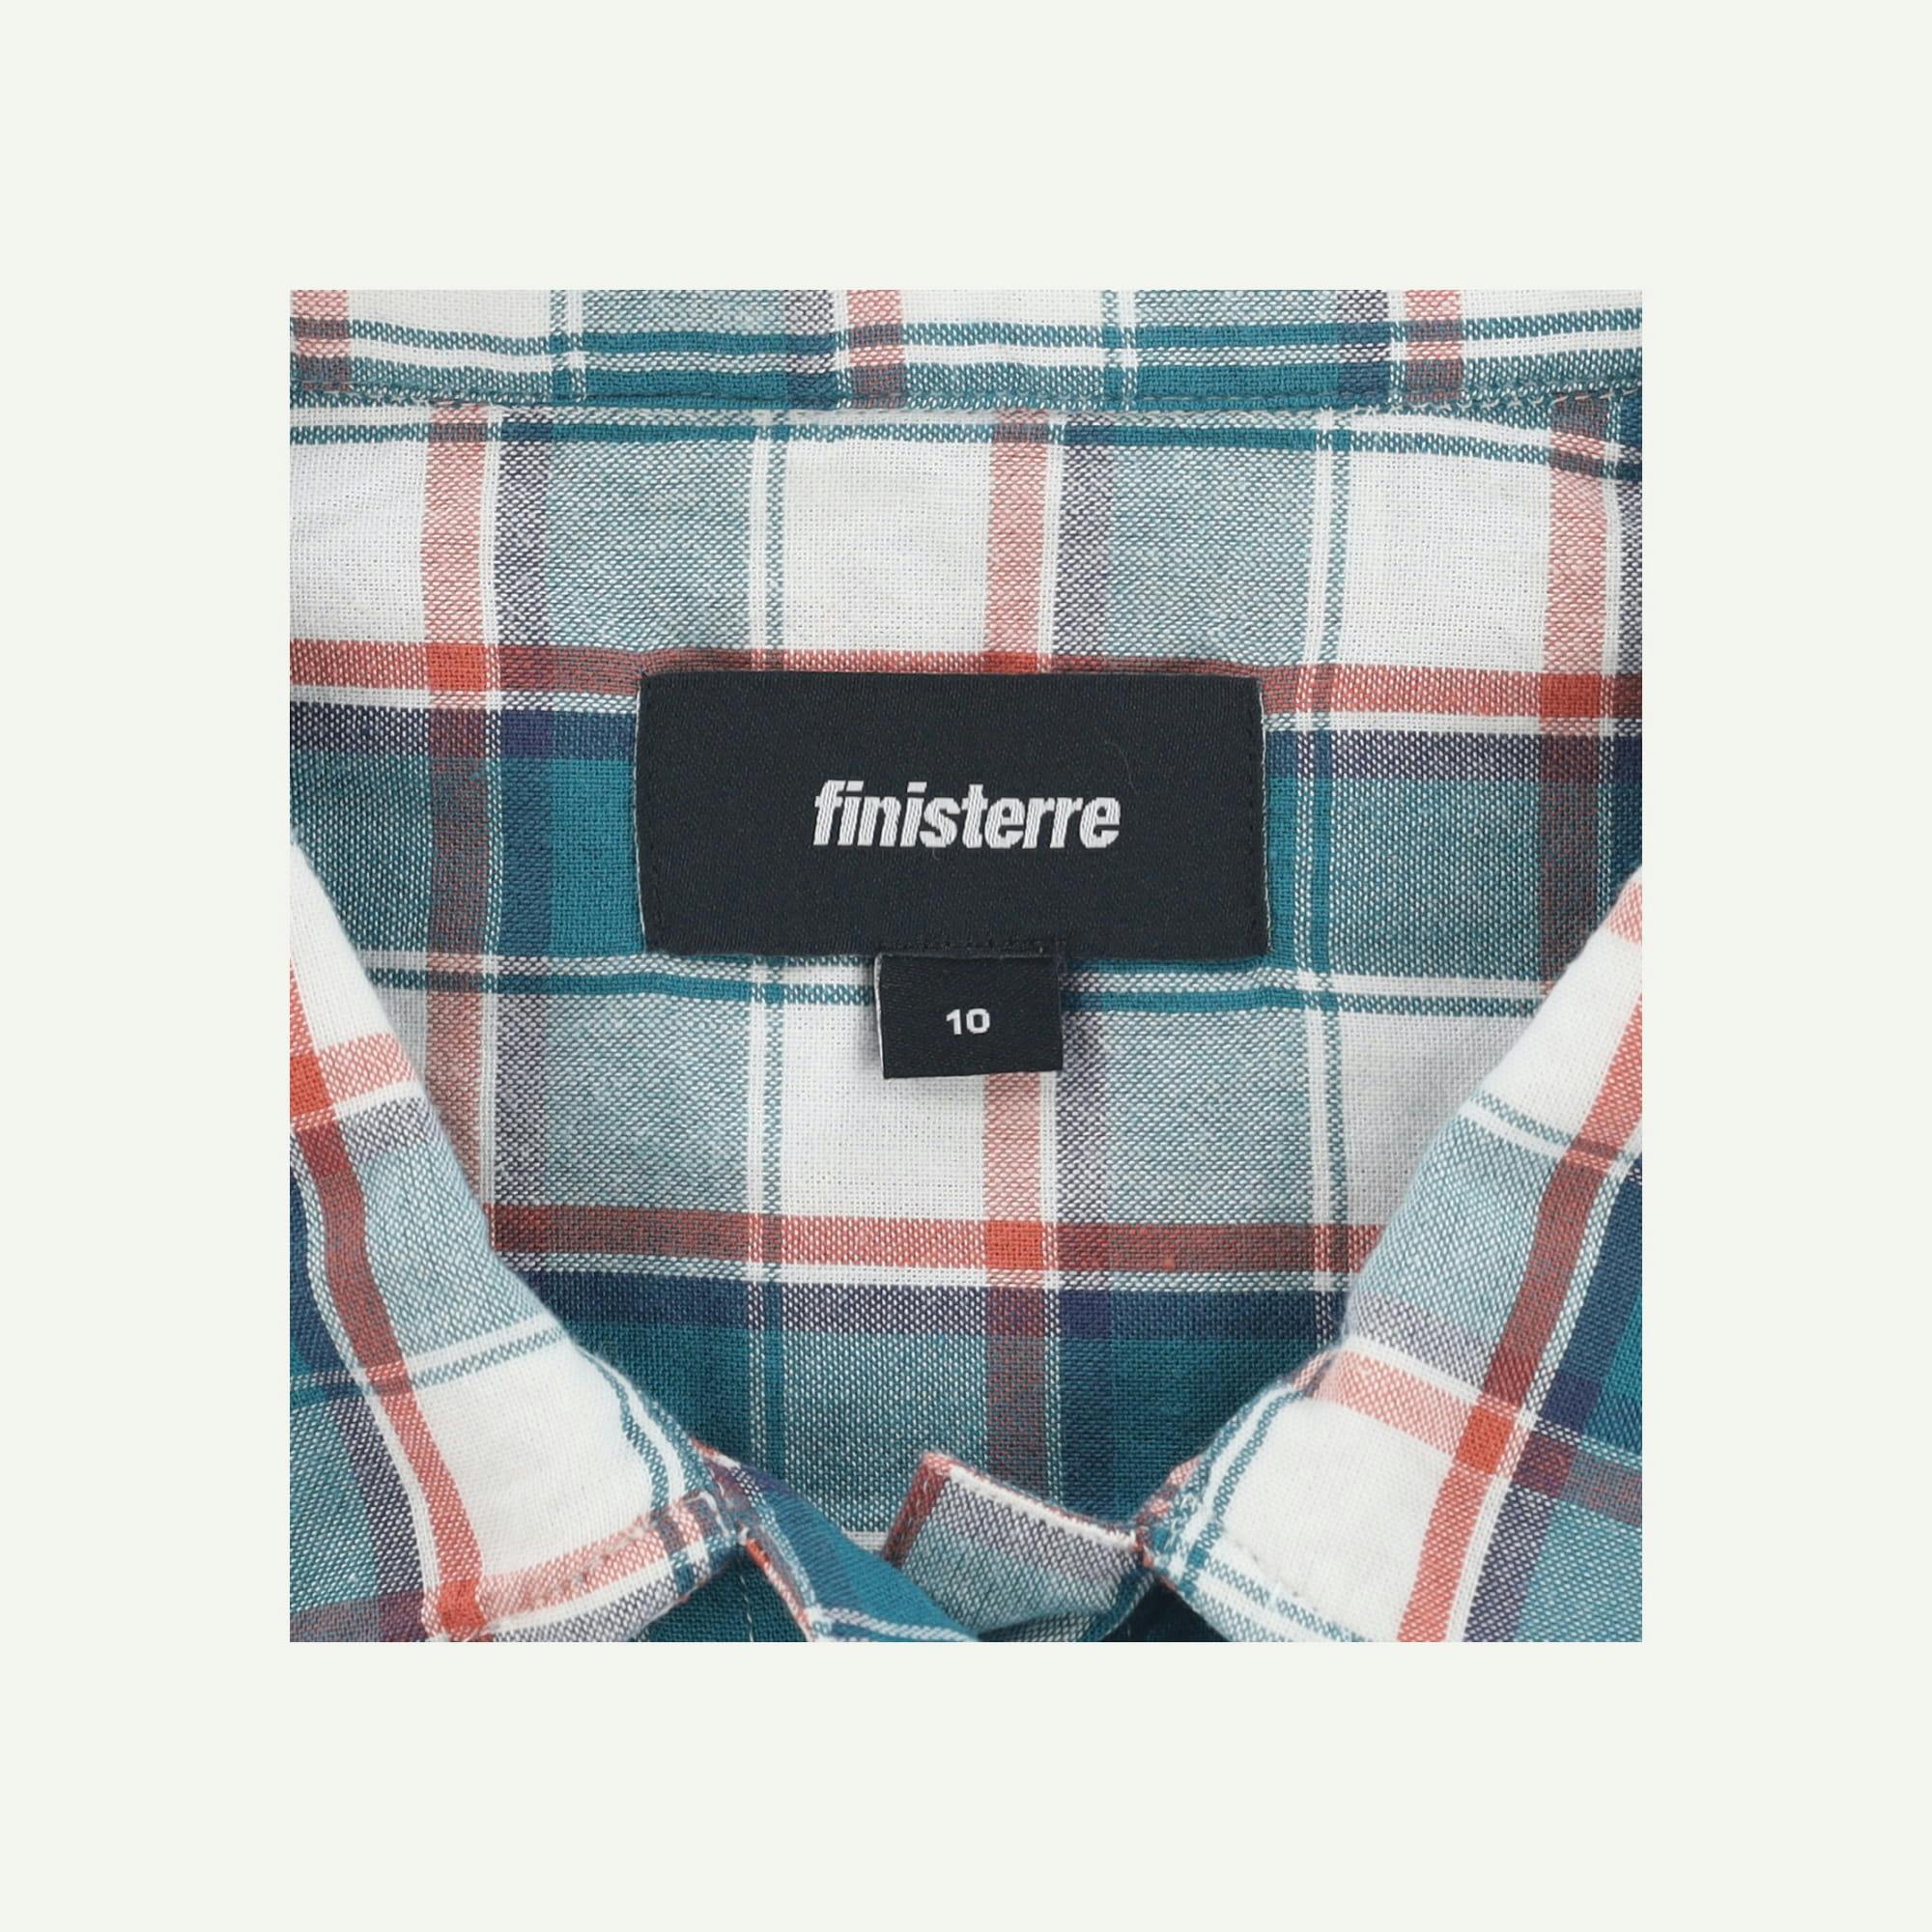 Finisterre As new Multi Coloured Shirt